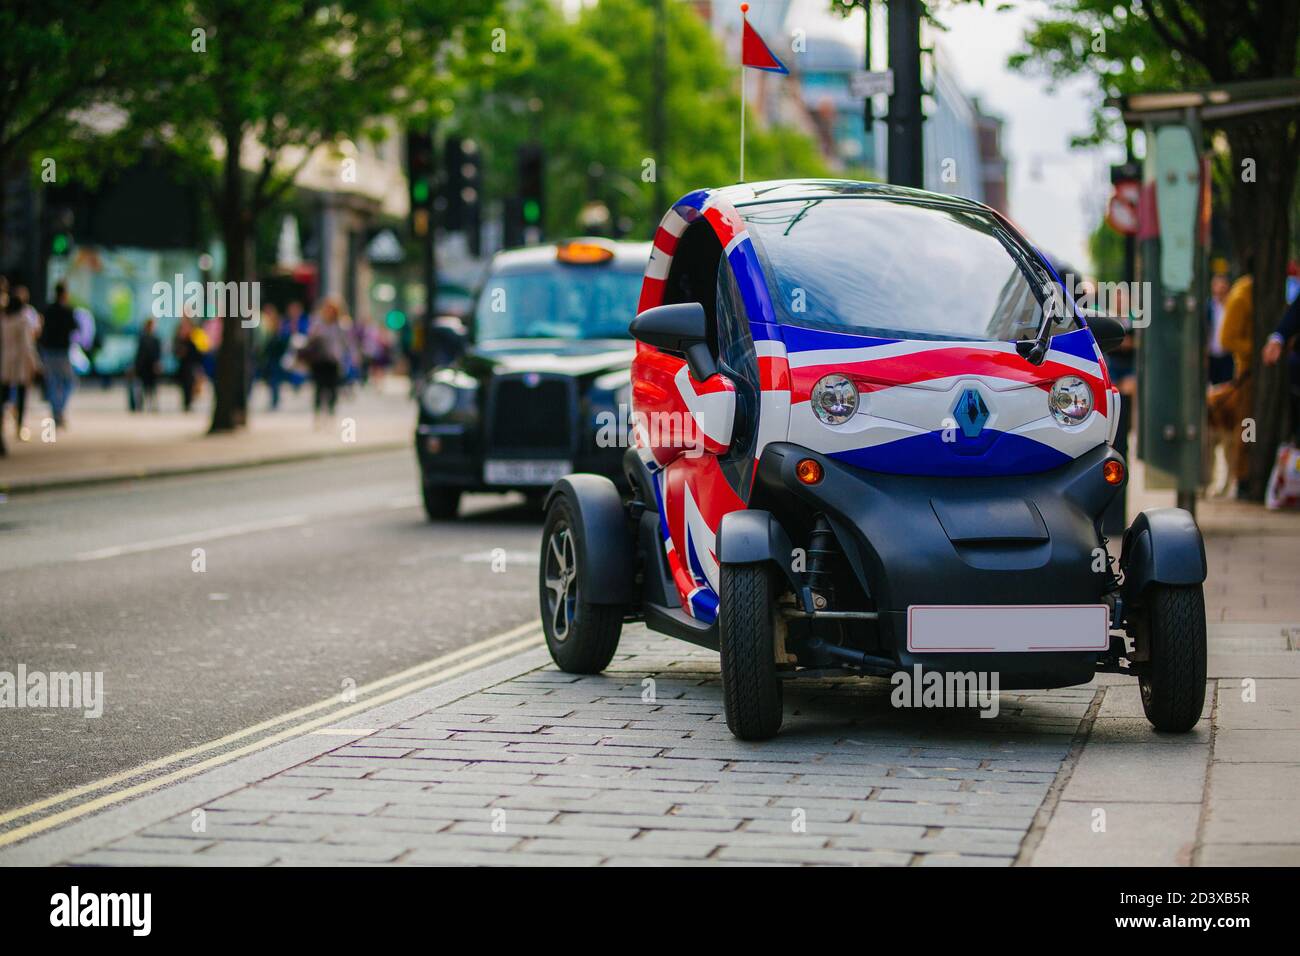 LONDON, UK - MAY 28, 2018:Small modern Renault electric car with union jack flag graphic park in the busy Oxford Street Stock Photo